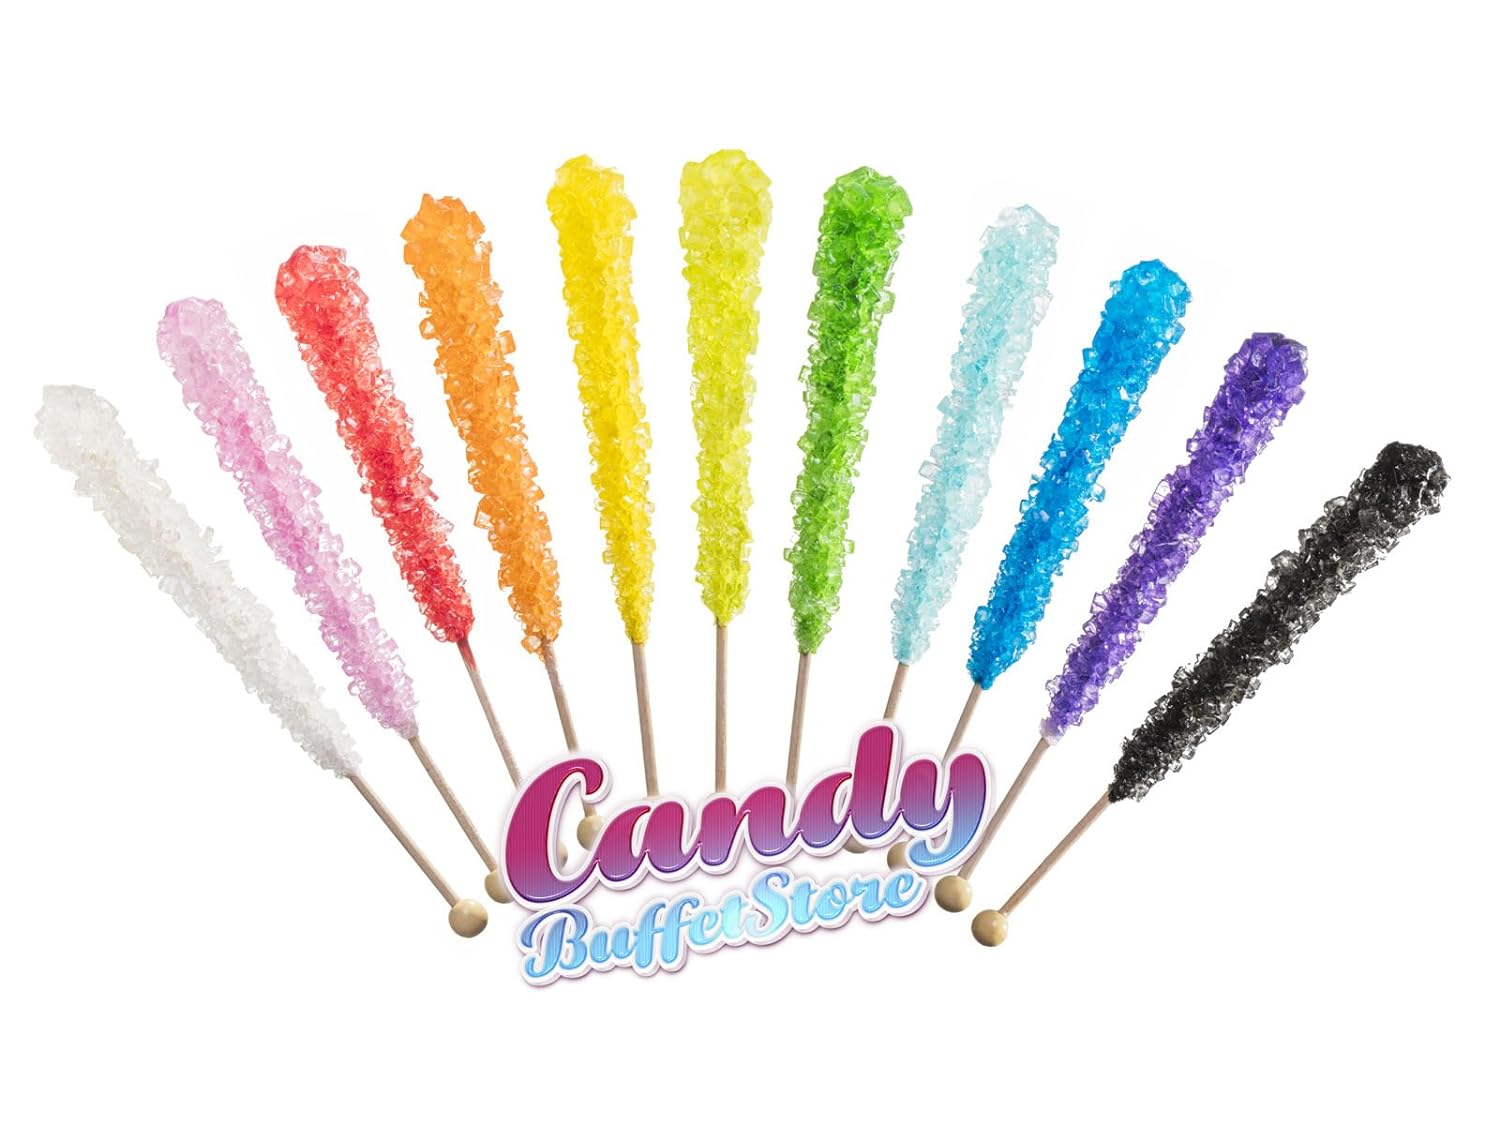  Candy Buffet Store Large White Rock Candy - 12 Pack Sugar Flavored - How To Build a Candy Buffet Table Guide Included